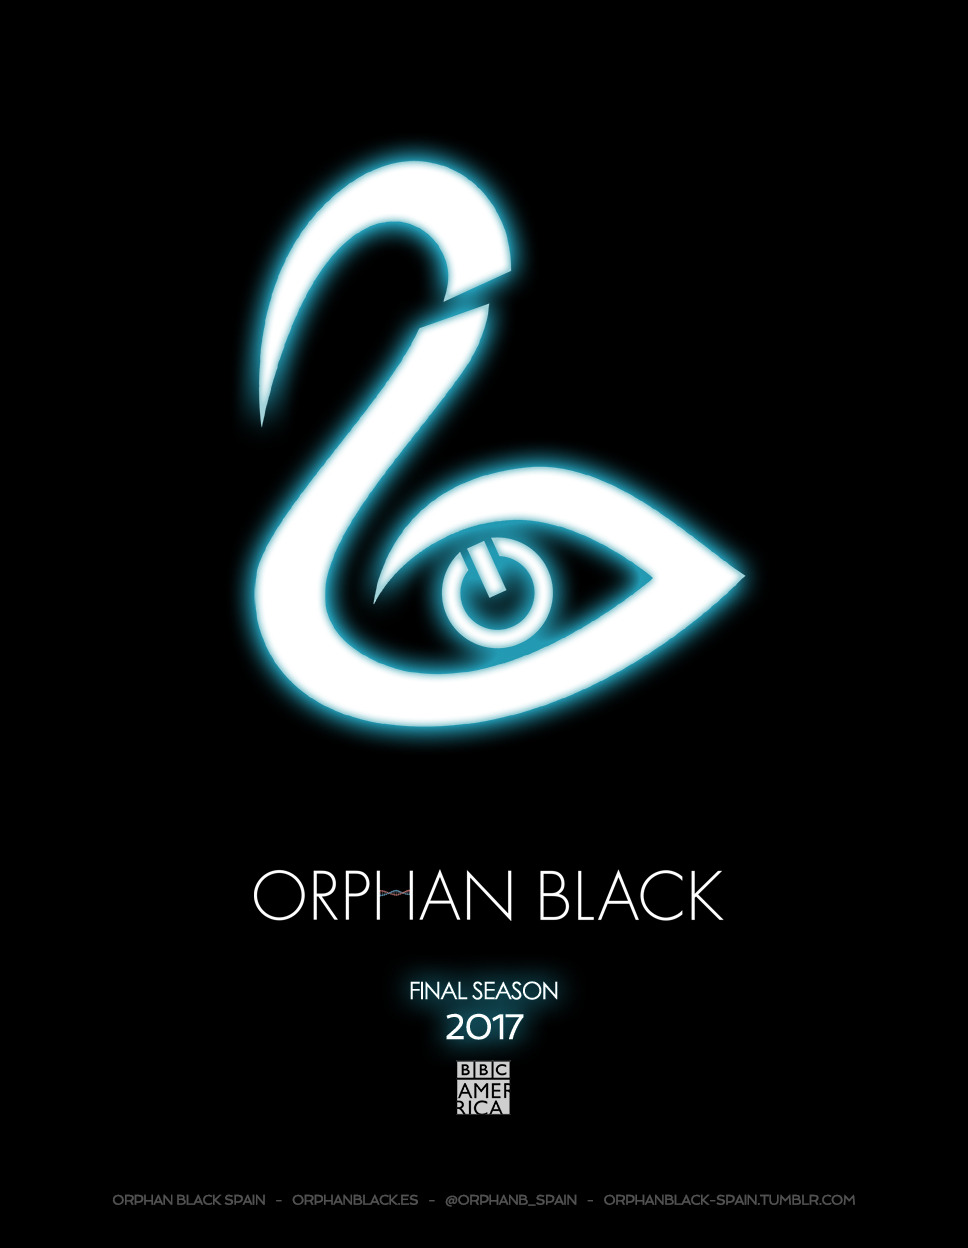 Orphan Black Spain This Is My Fanmade Poster For Season 5 Of Orphan